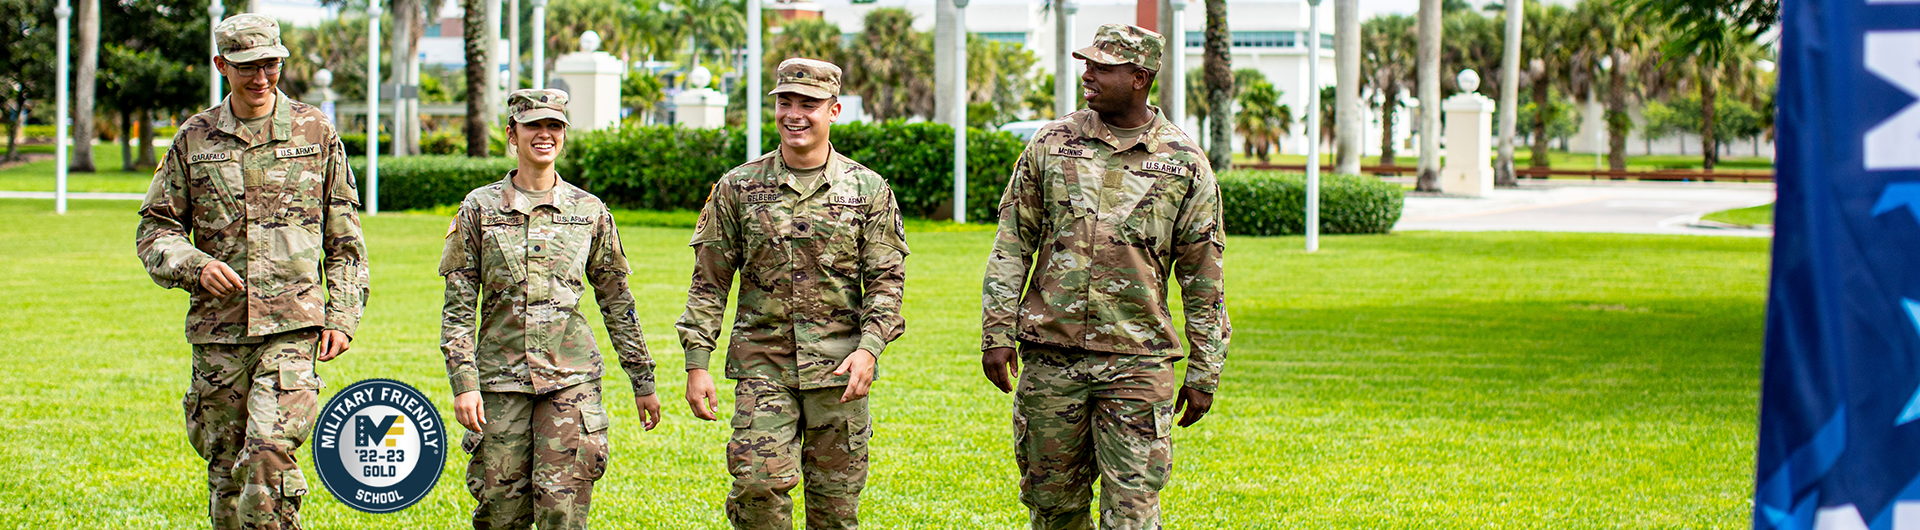 NSU students in army fatigues walking on campus